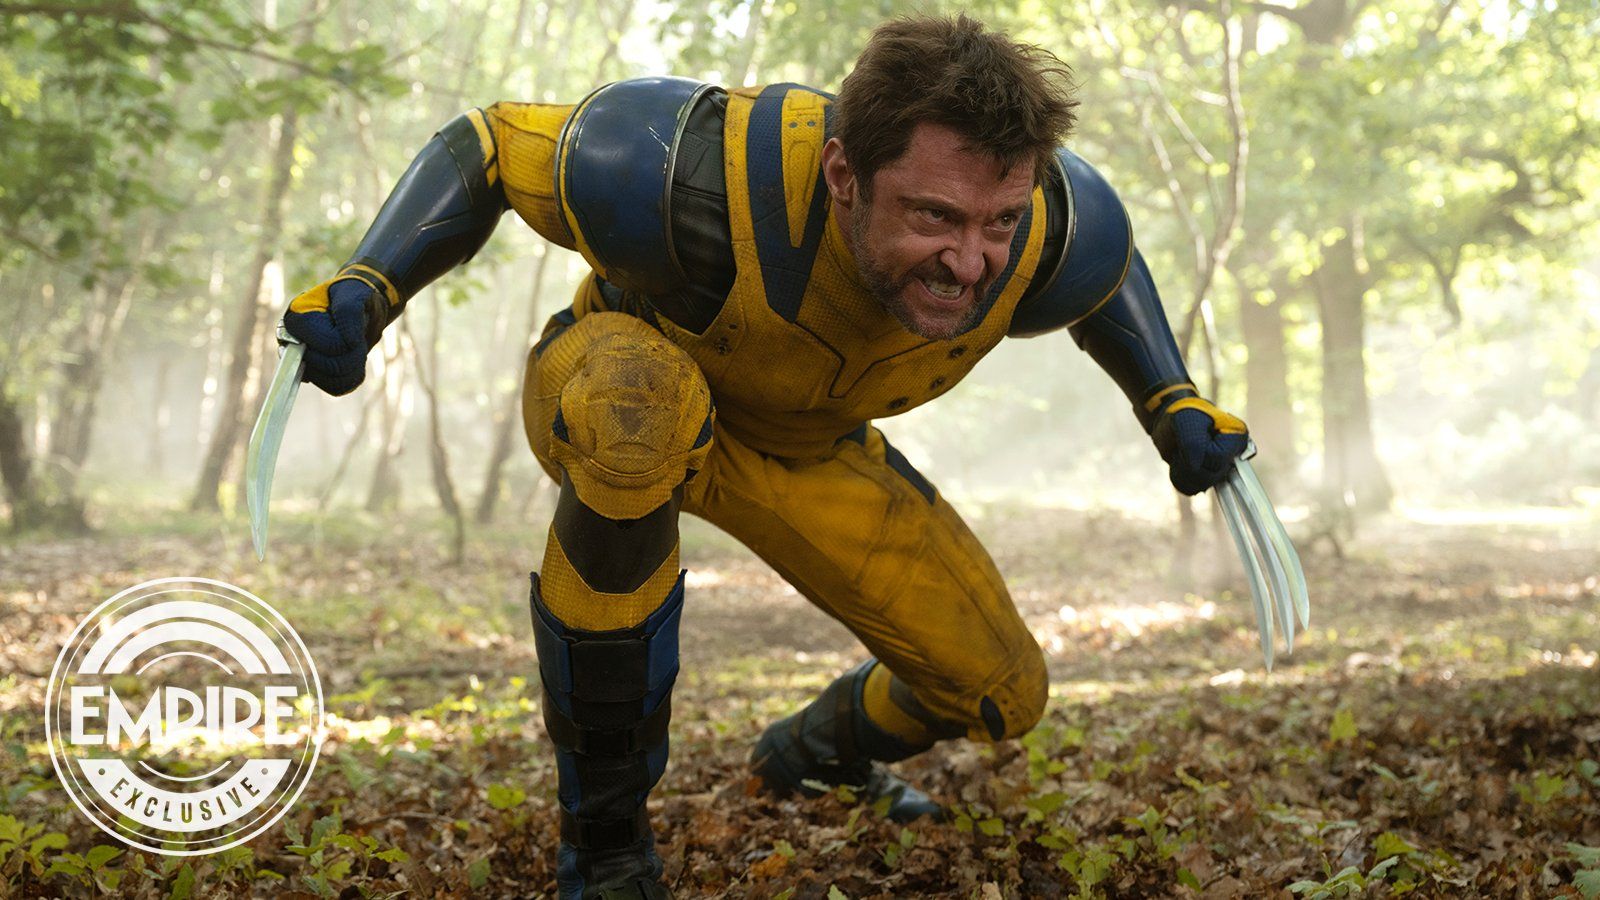 'Deadpool & Wolverine' Image - Hugh Jackman Has His Claws Out